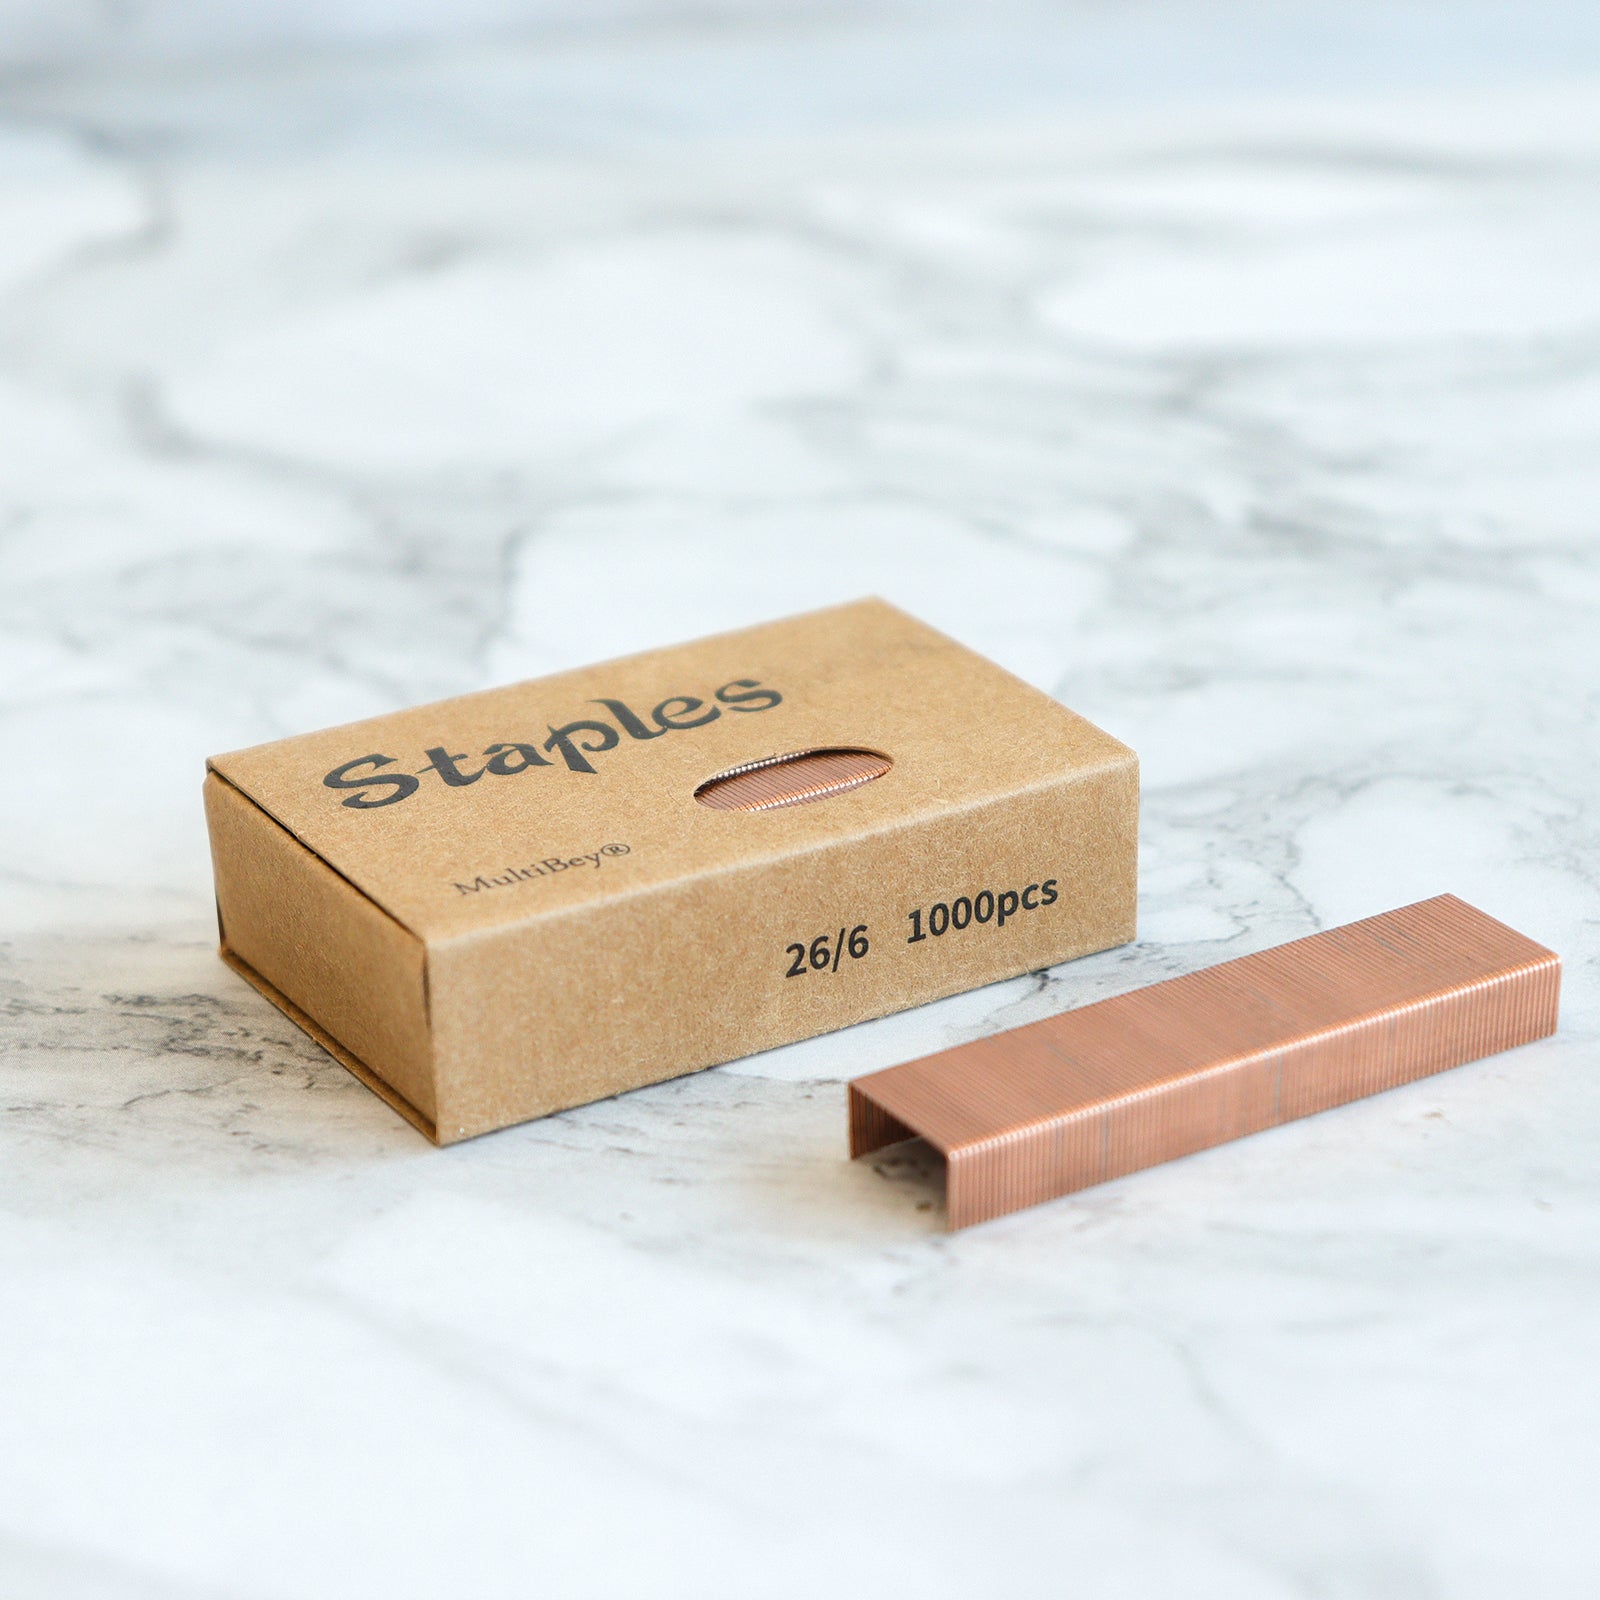 MultiBey Rose Gold Staples (4 Boxes) – MultiBey - For Your Fashion Office